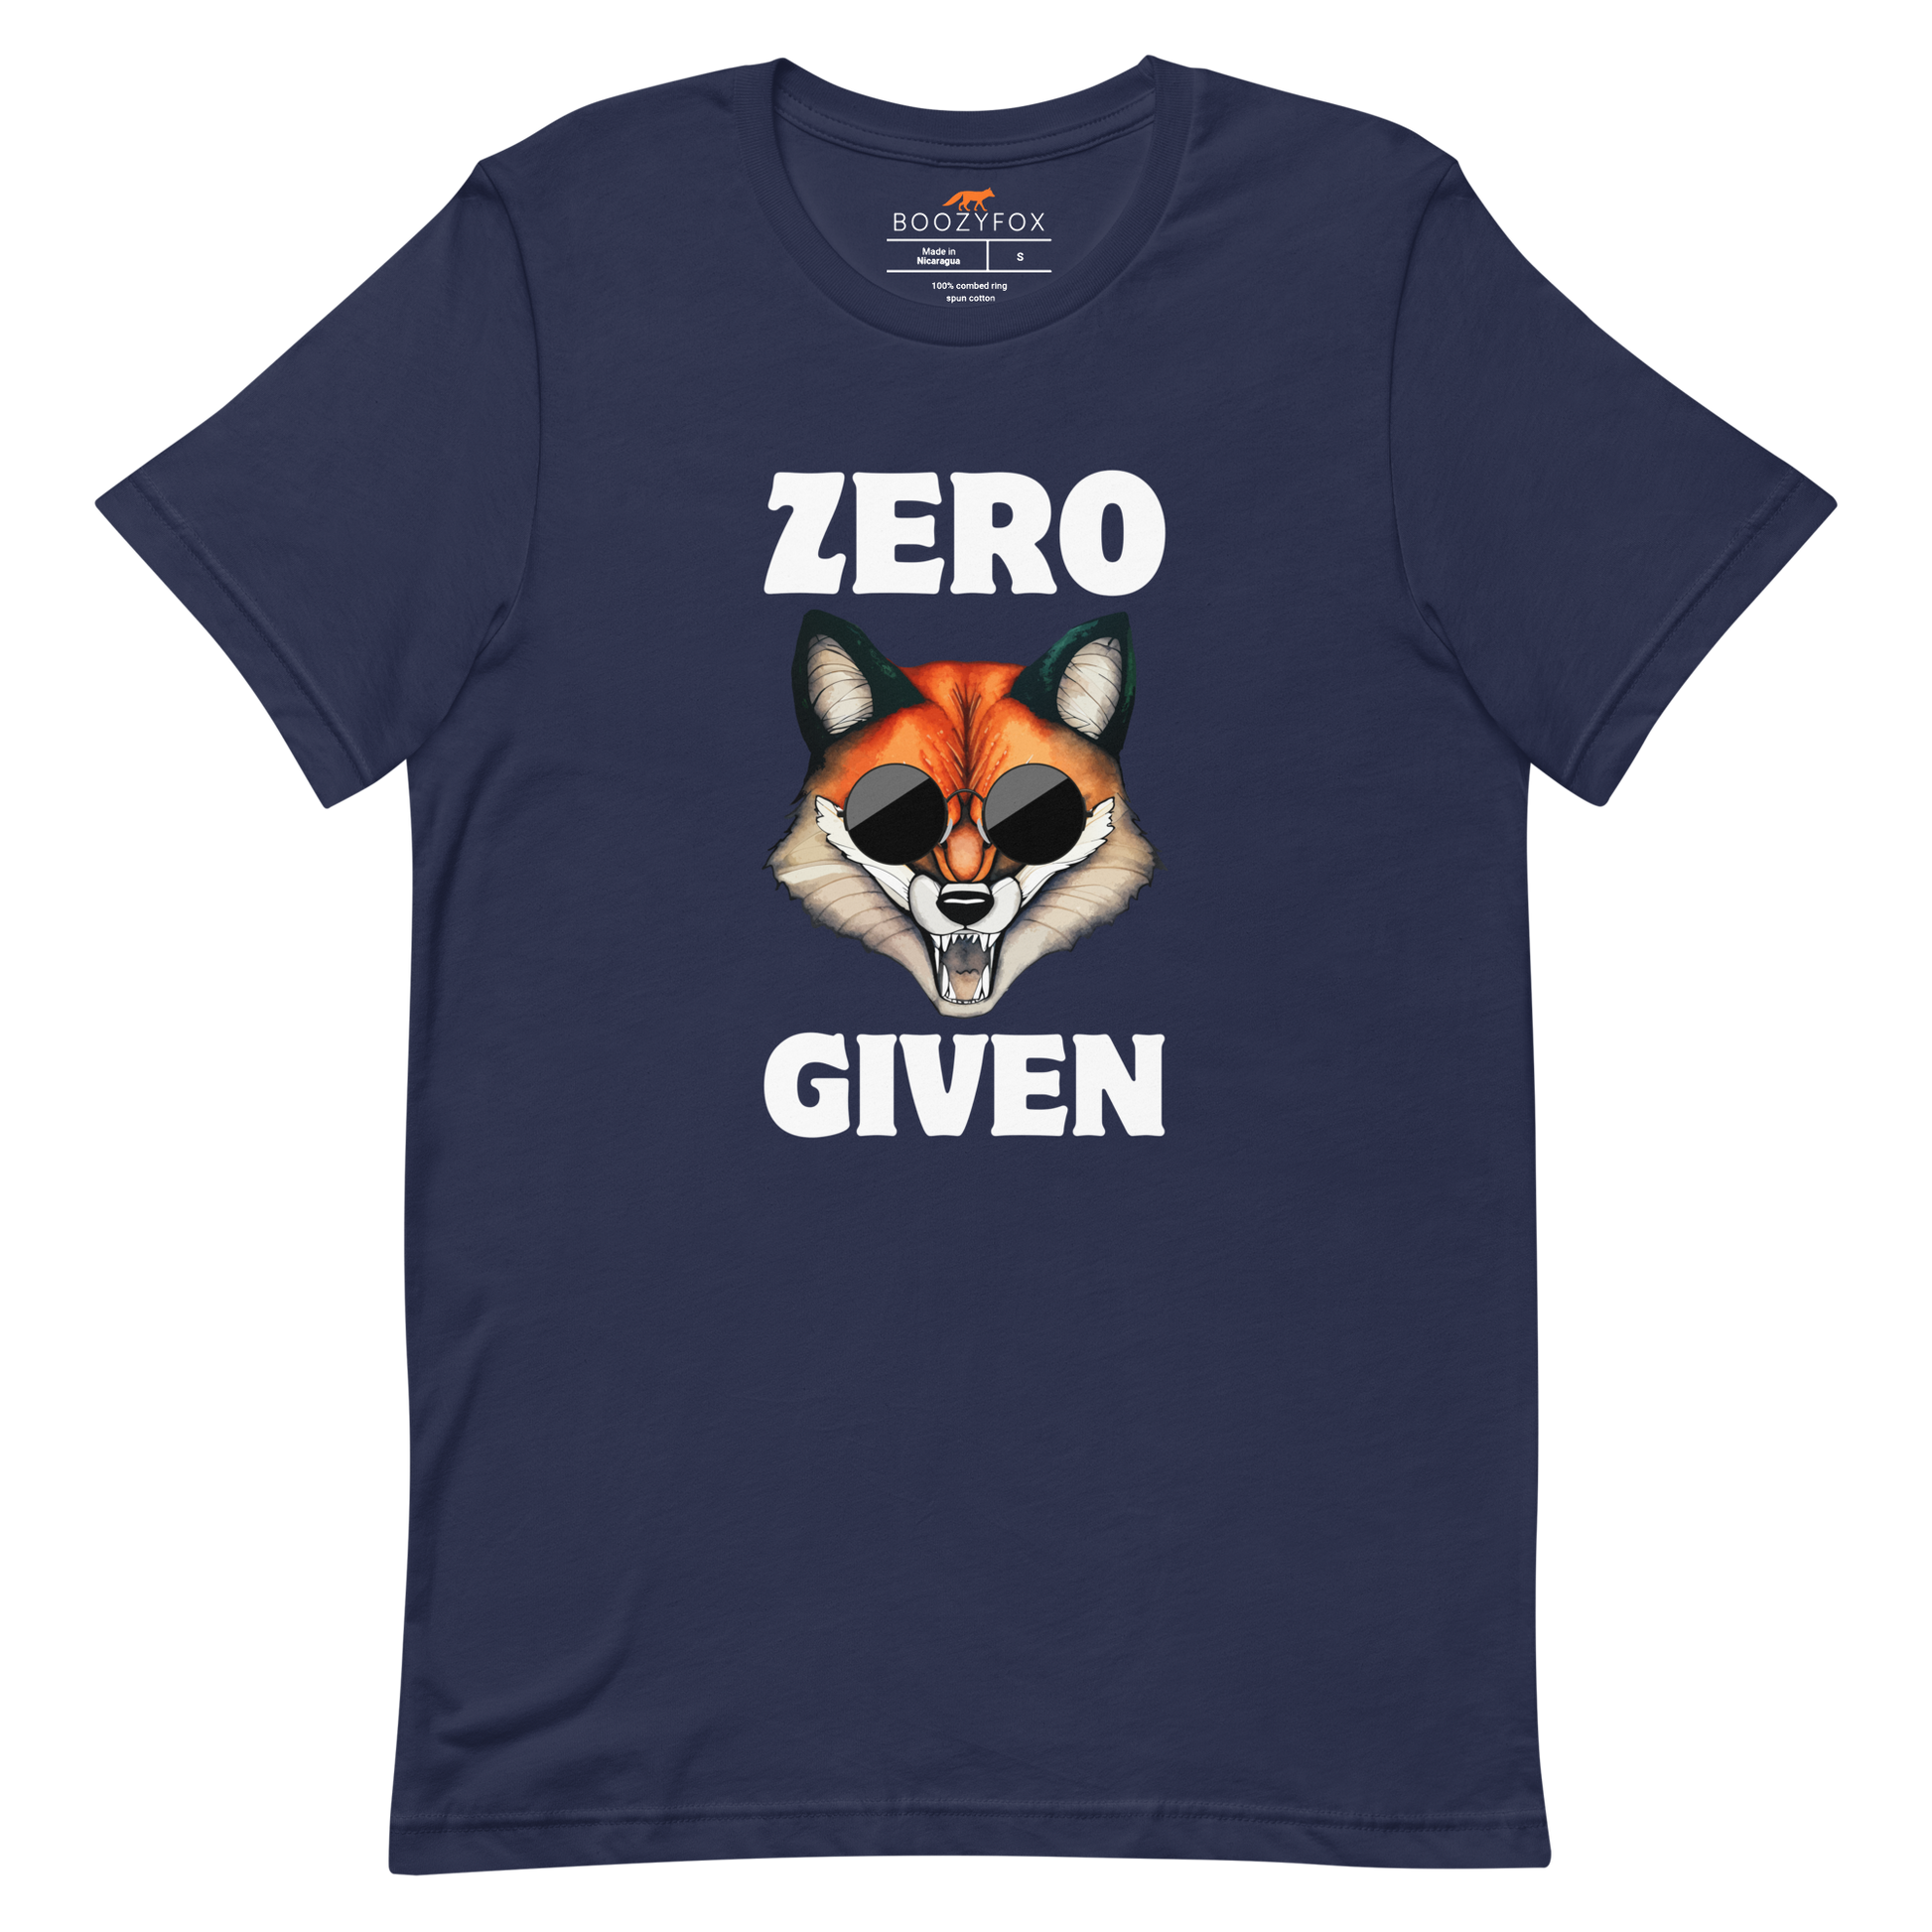 Navy Premium Fox Tee featuring a Zero Fox Given graphic on the chest - Funny Graphic Fox Tees - Boozy Fox